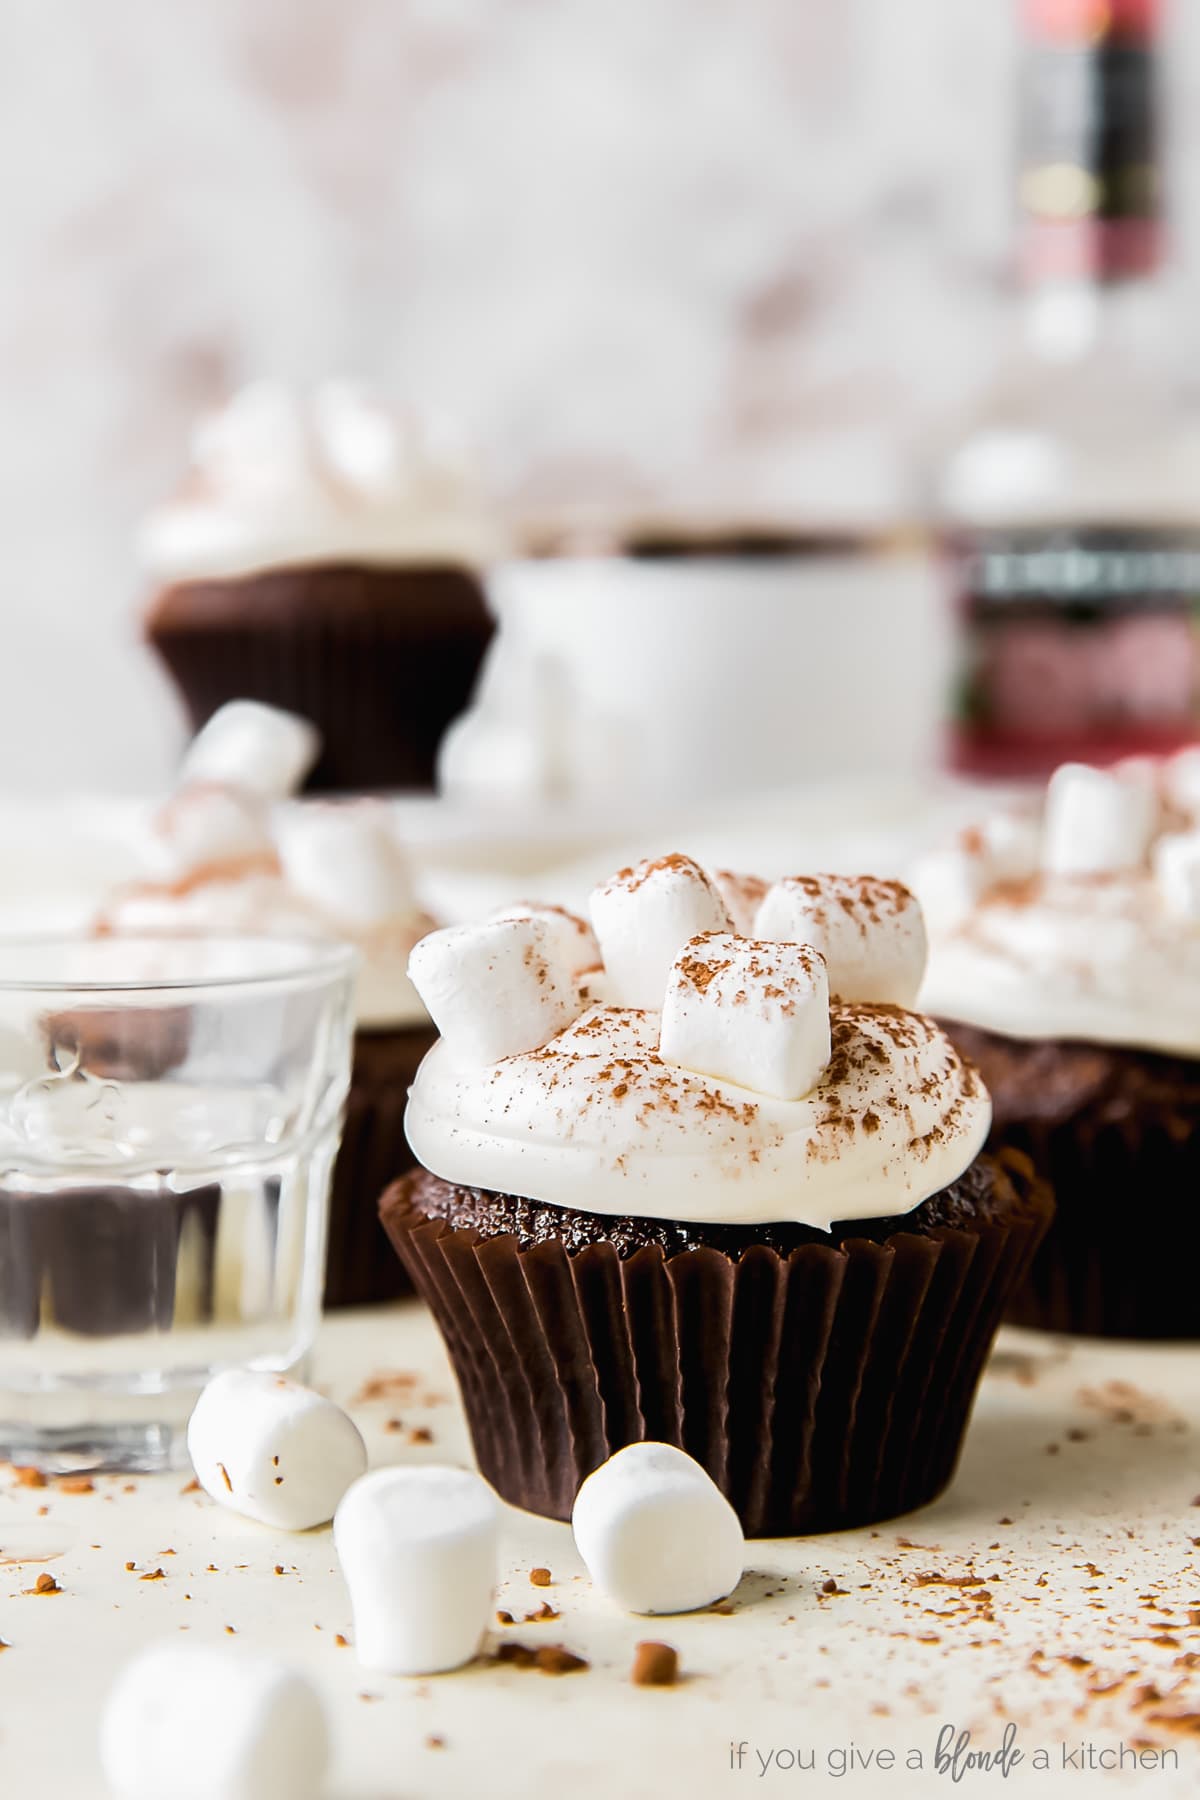 hot cocoa cupcake topped with marshmallow frosting, next to shot glass of peppermint schnapps